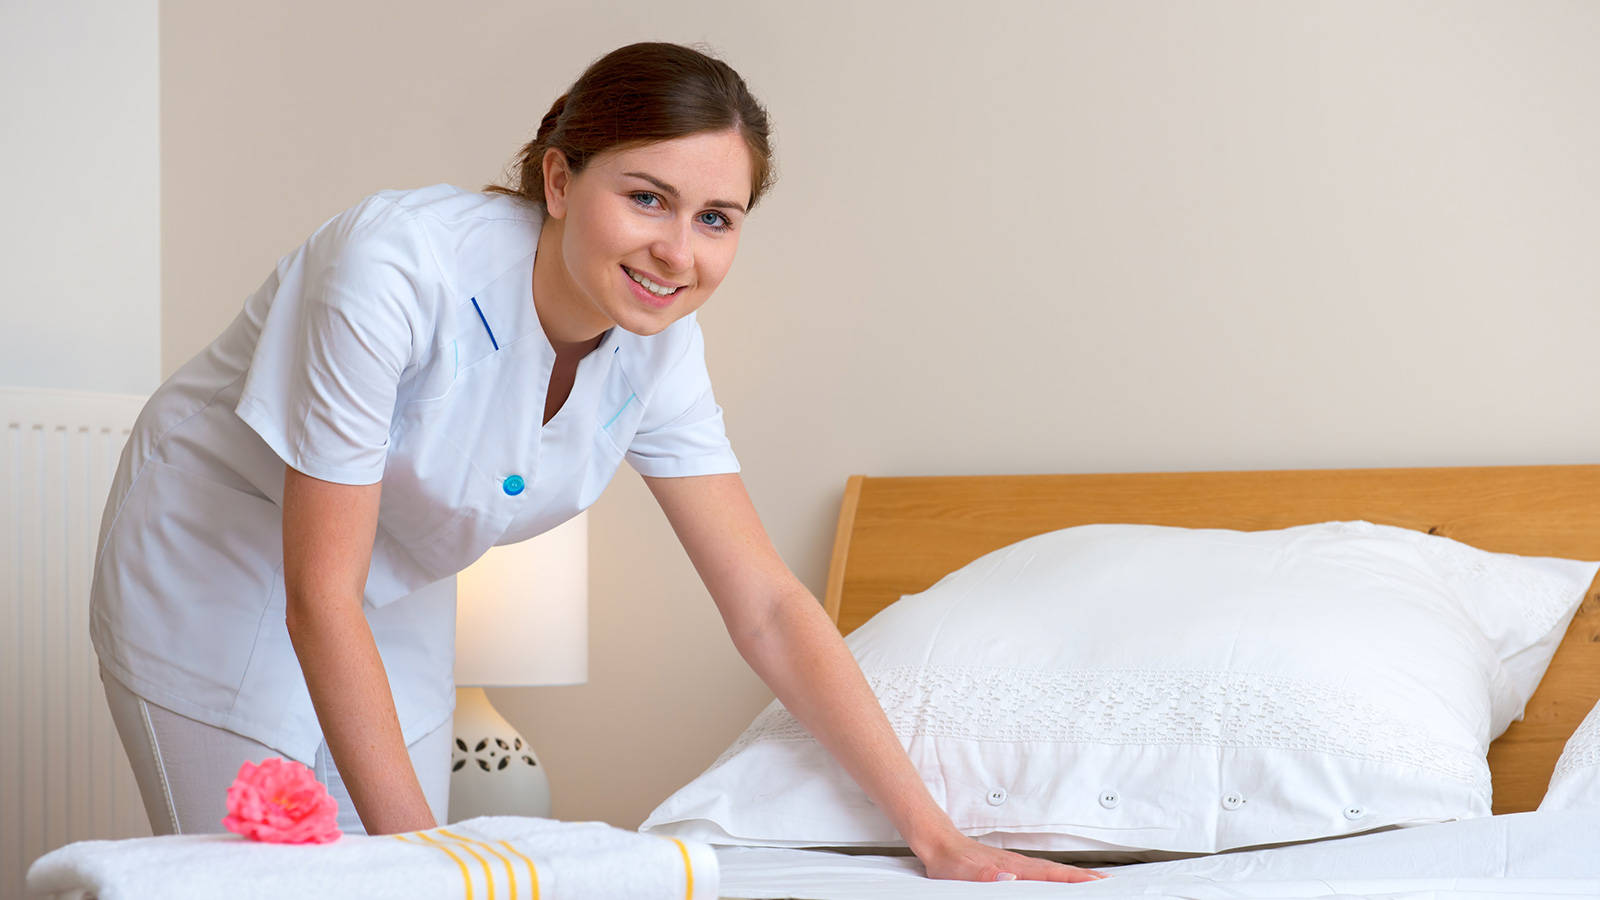 Female Housekeeper Smile Cleaning Bed Wallpaper